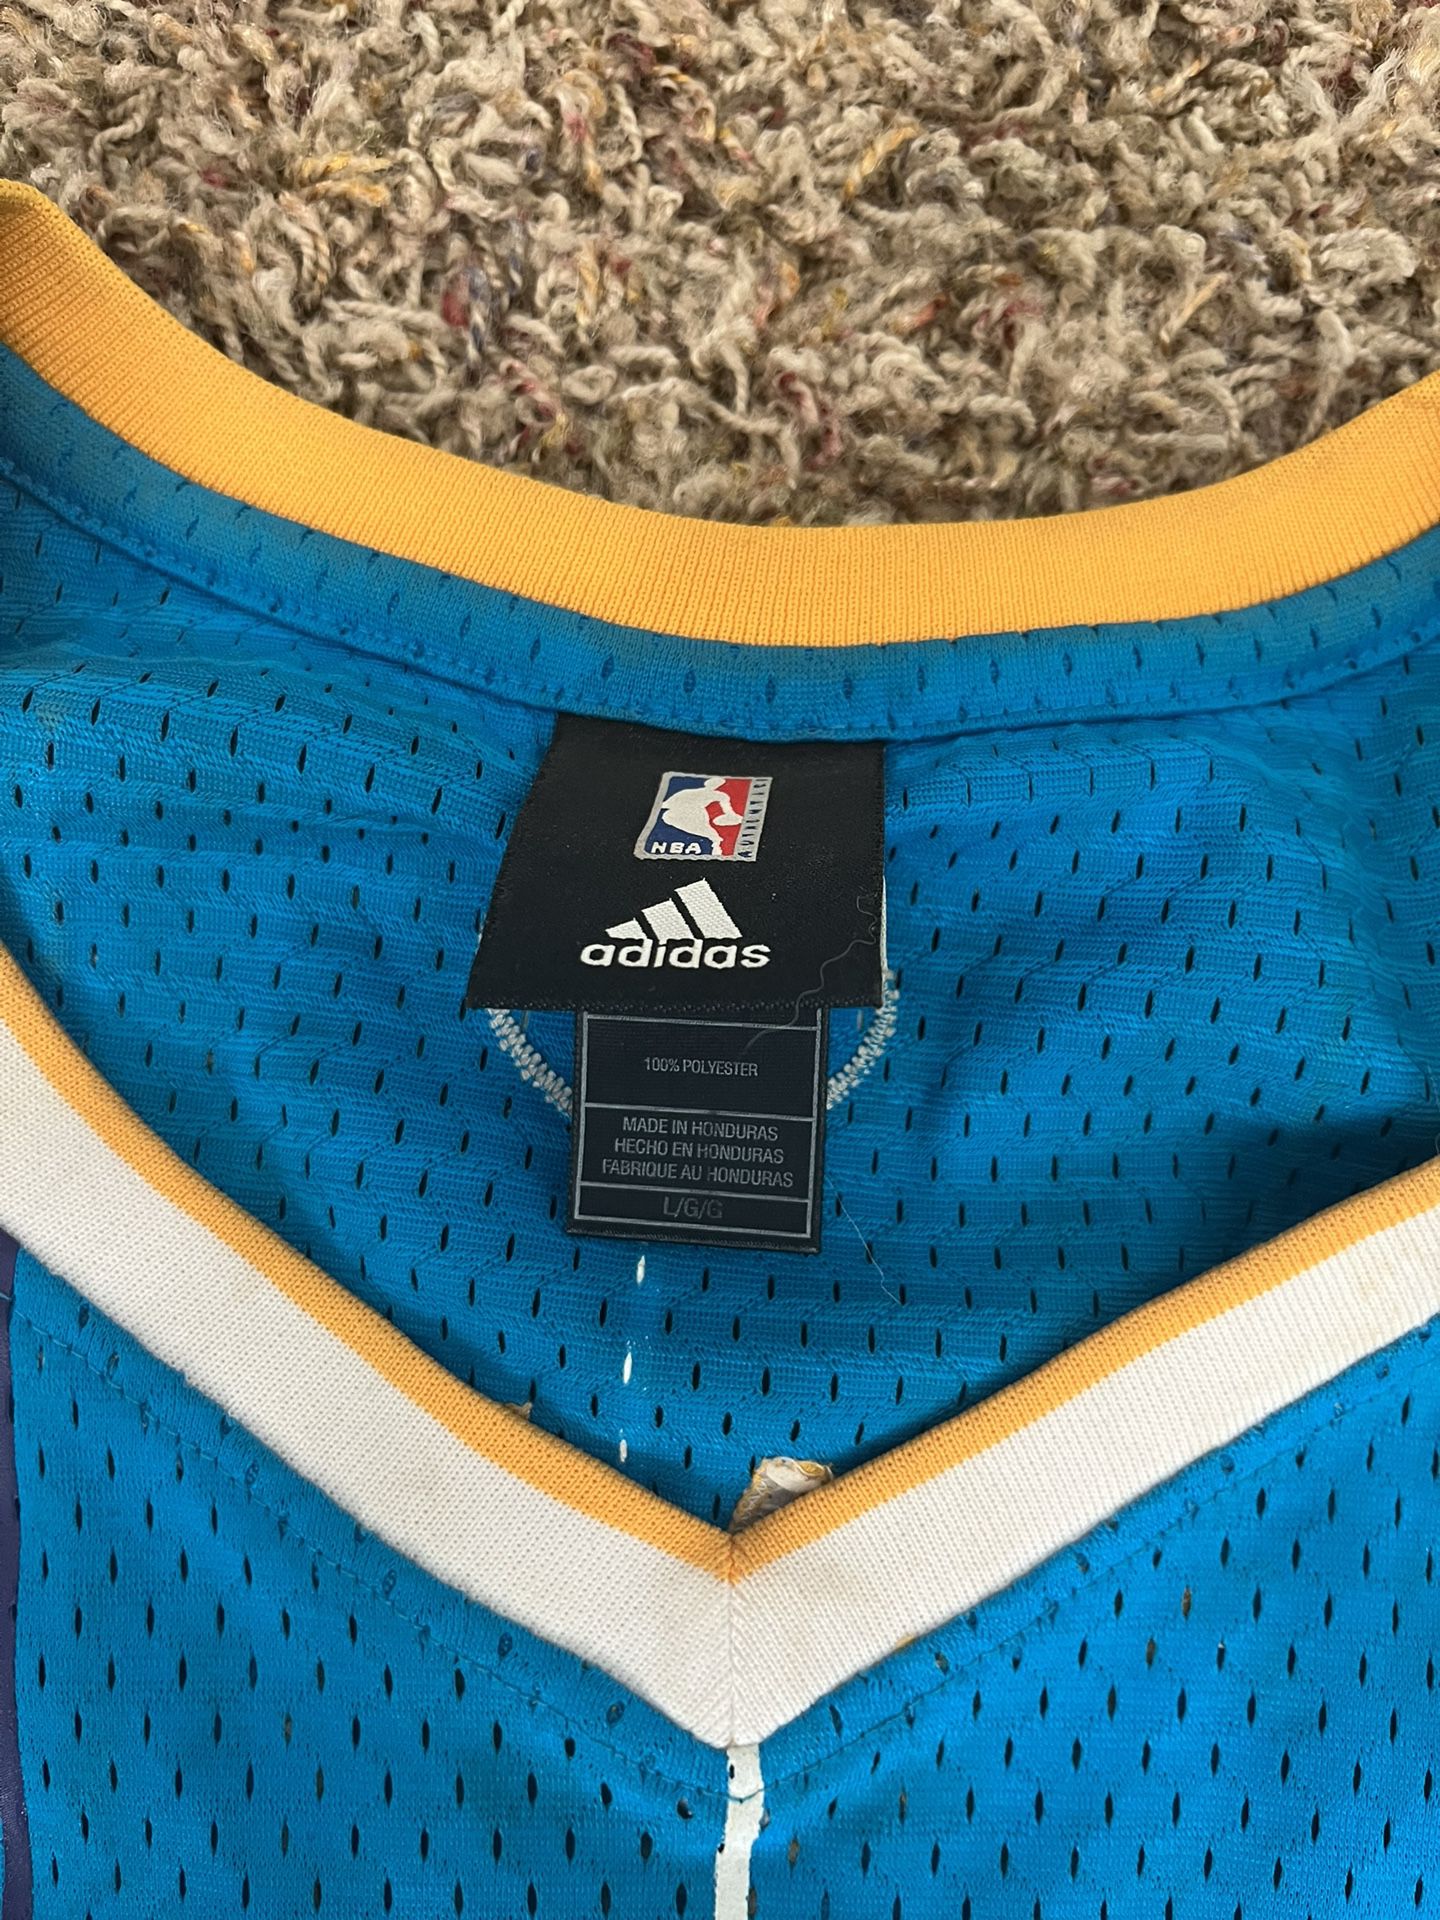 Chris Paul Hornets Jersey for Sale in Peabody, MA - OfferUp